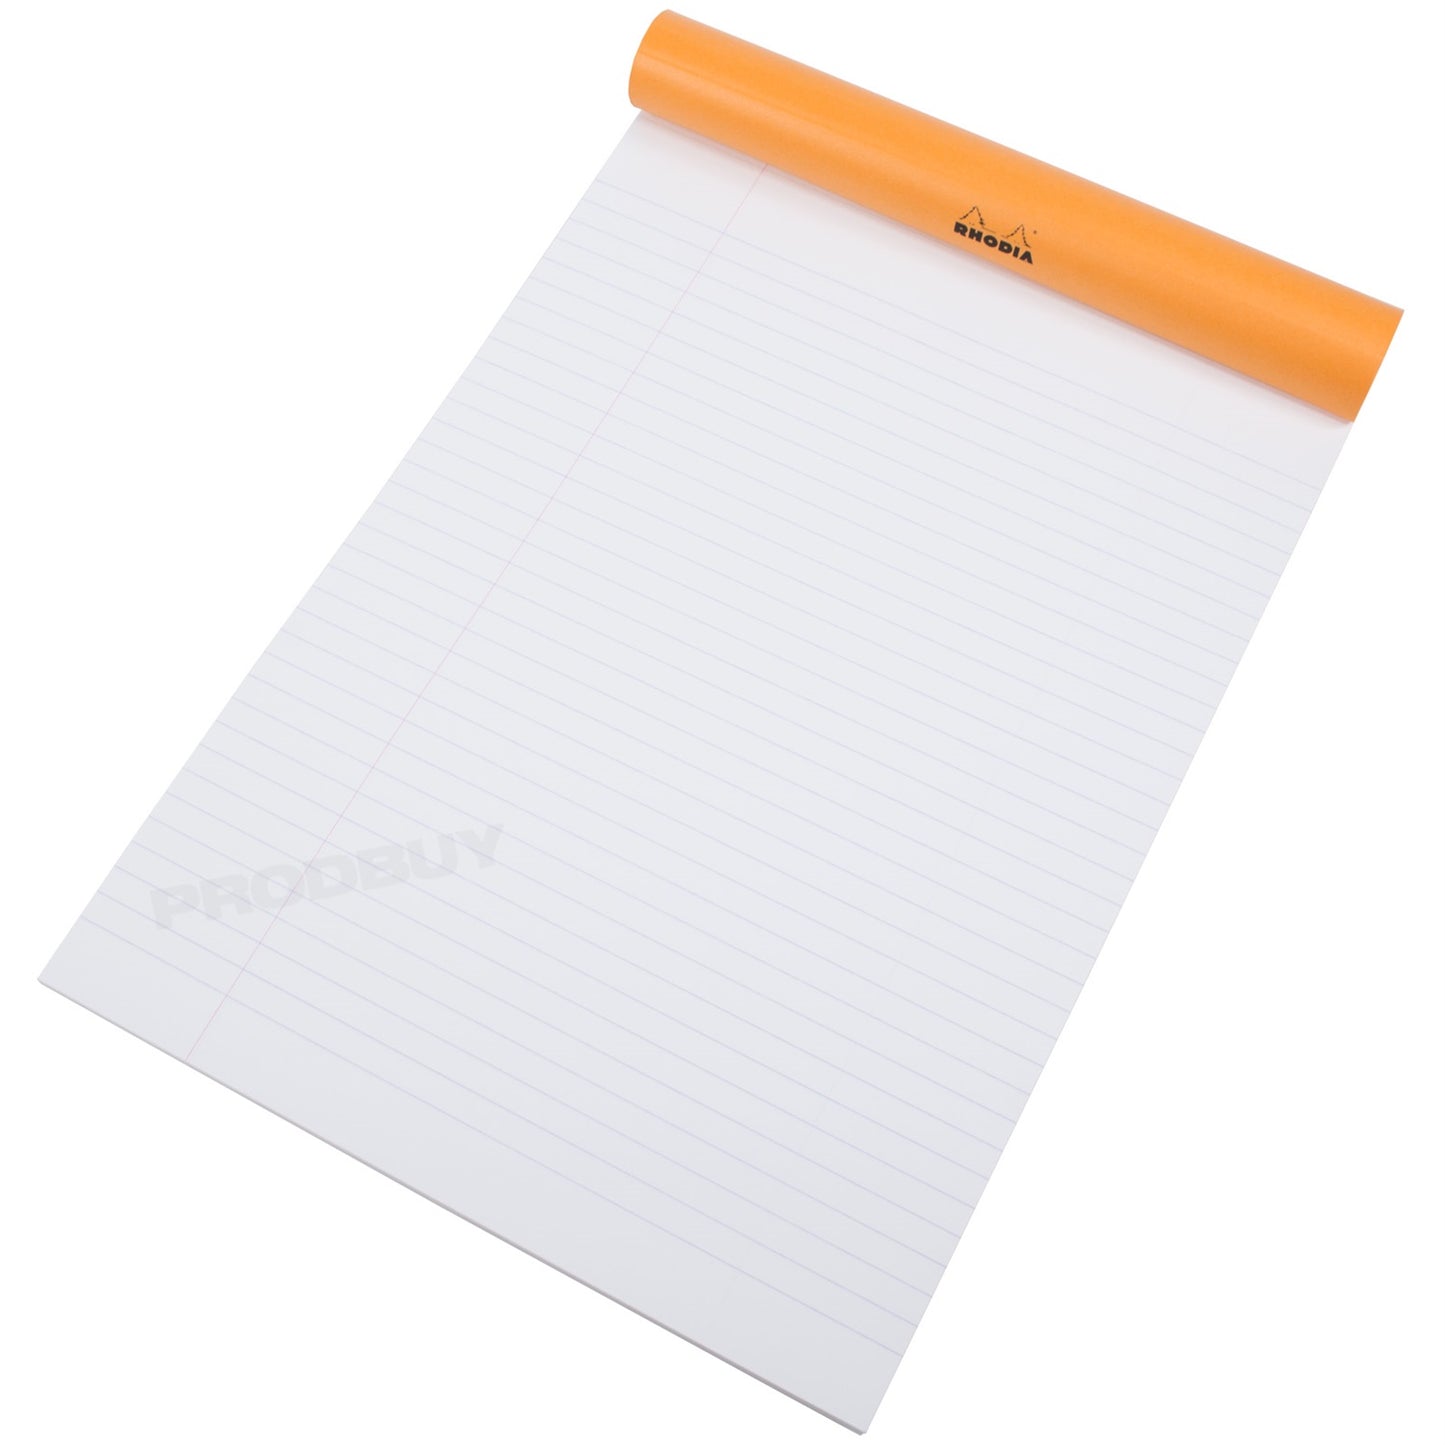 Set of 3 Rhodia A4 Lined Memo Pad Notebooks with Orange Covers